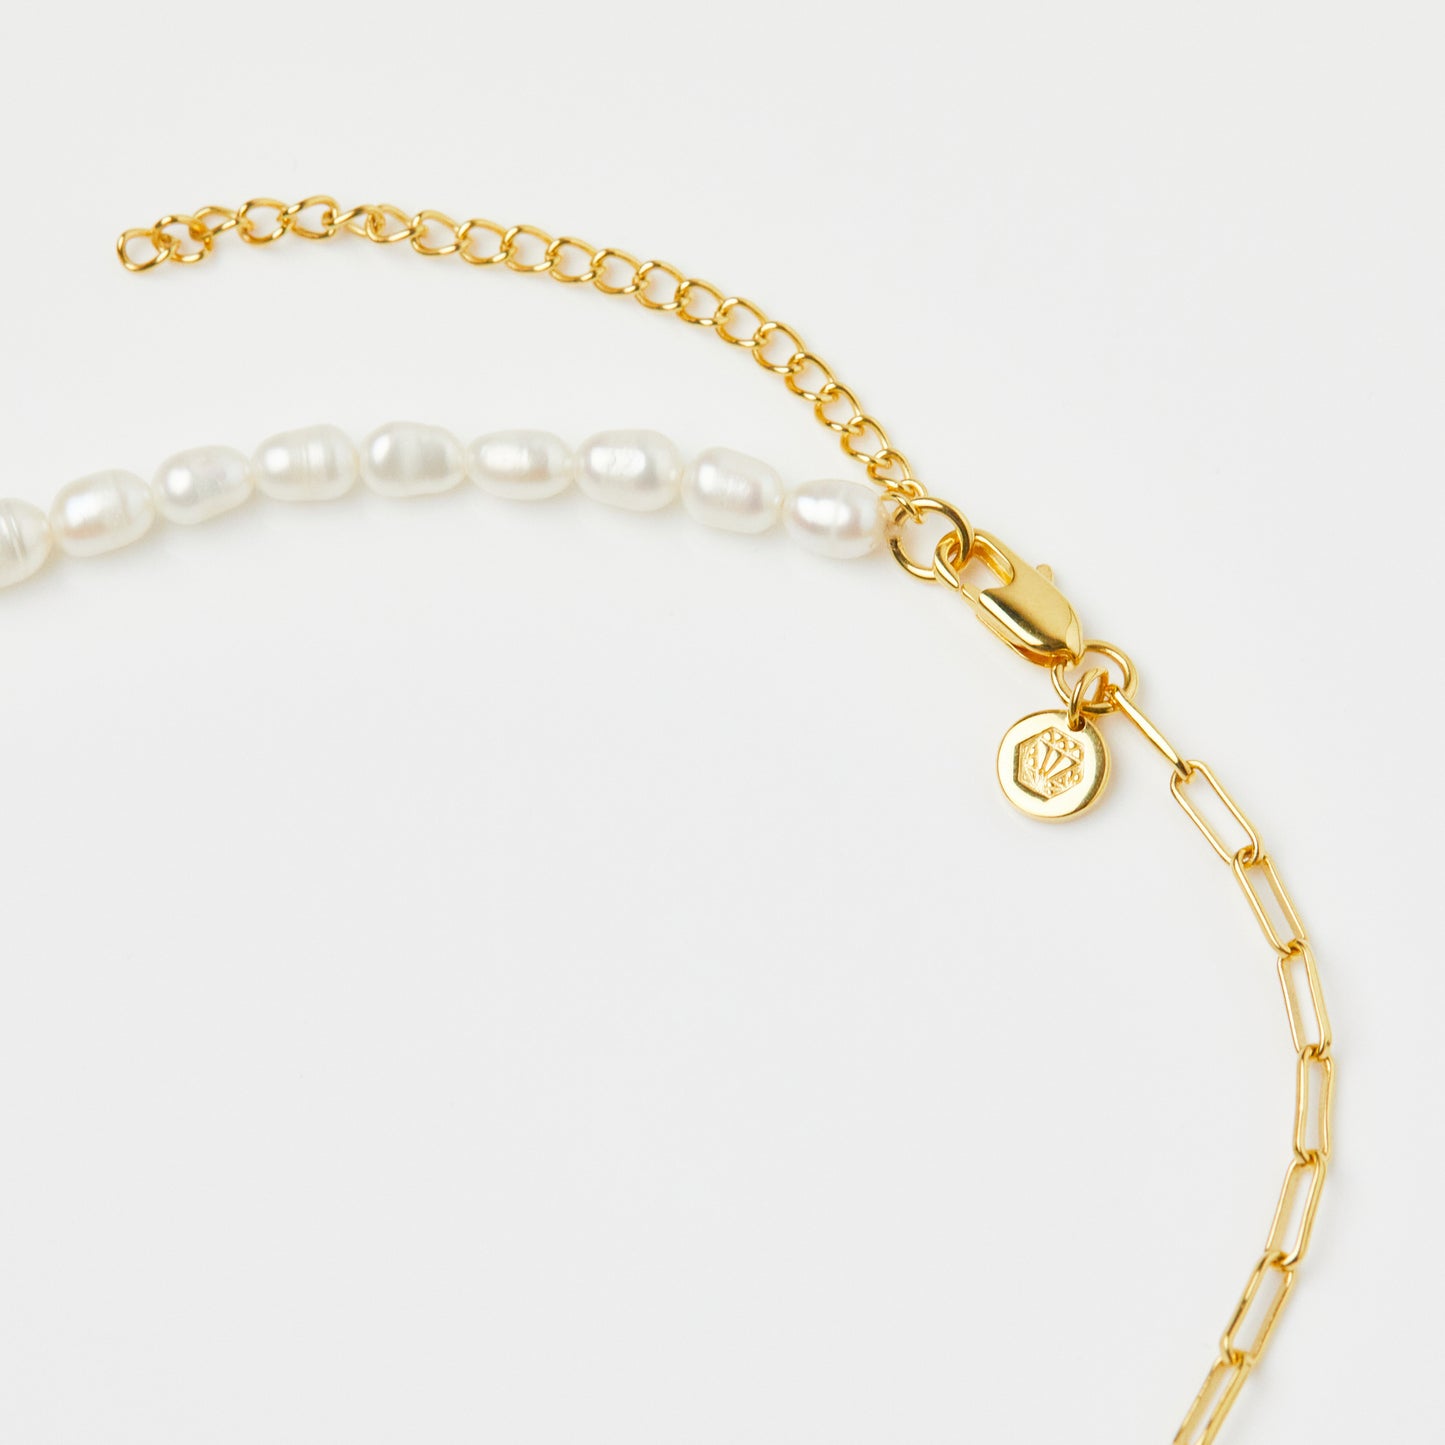 zoe sugg intentions lucky pearl and chain necklace in gold